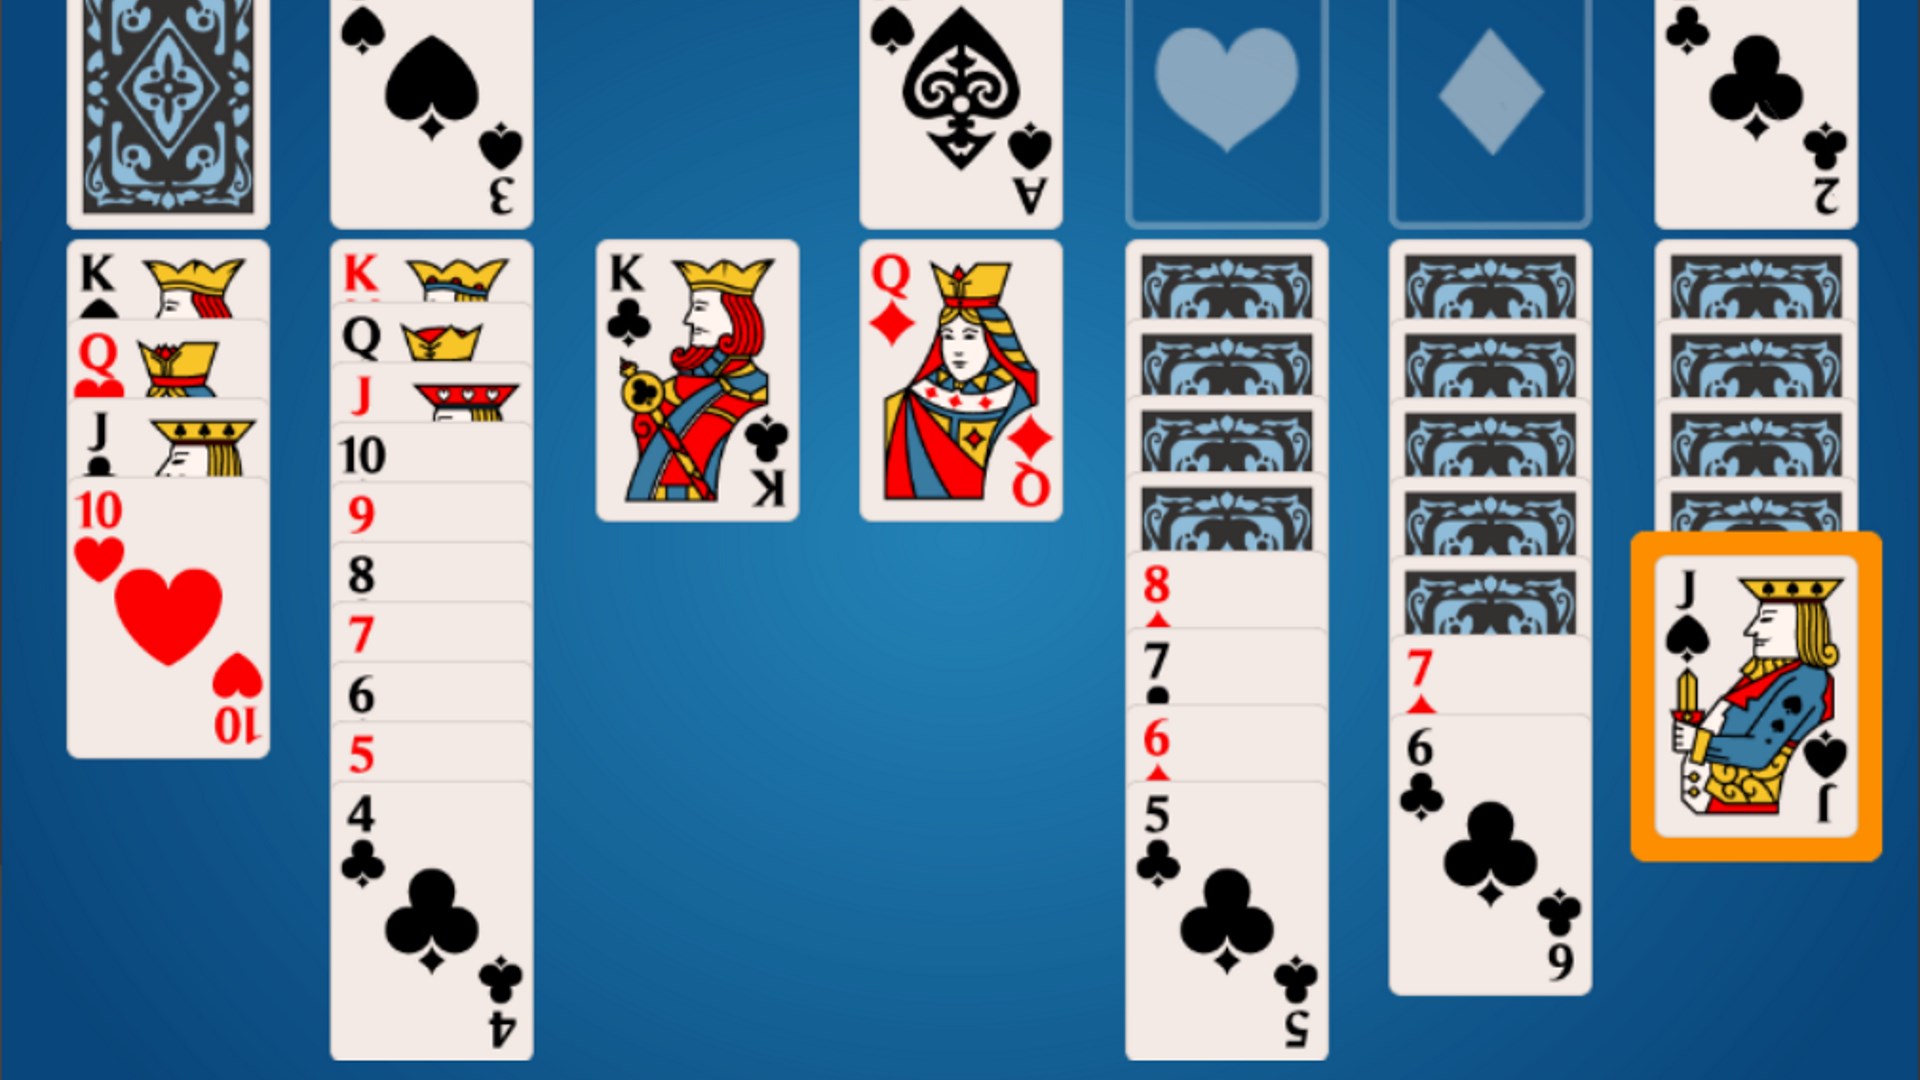 Klondike Solitaire - Play the Classic Card Game Online